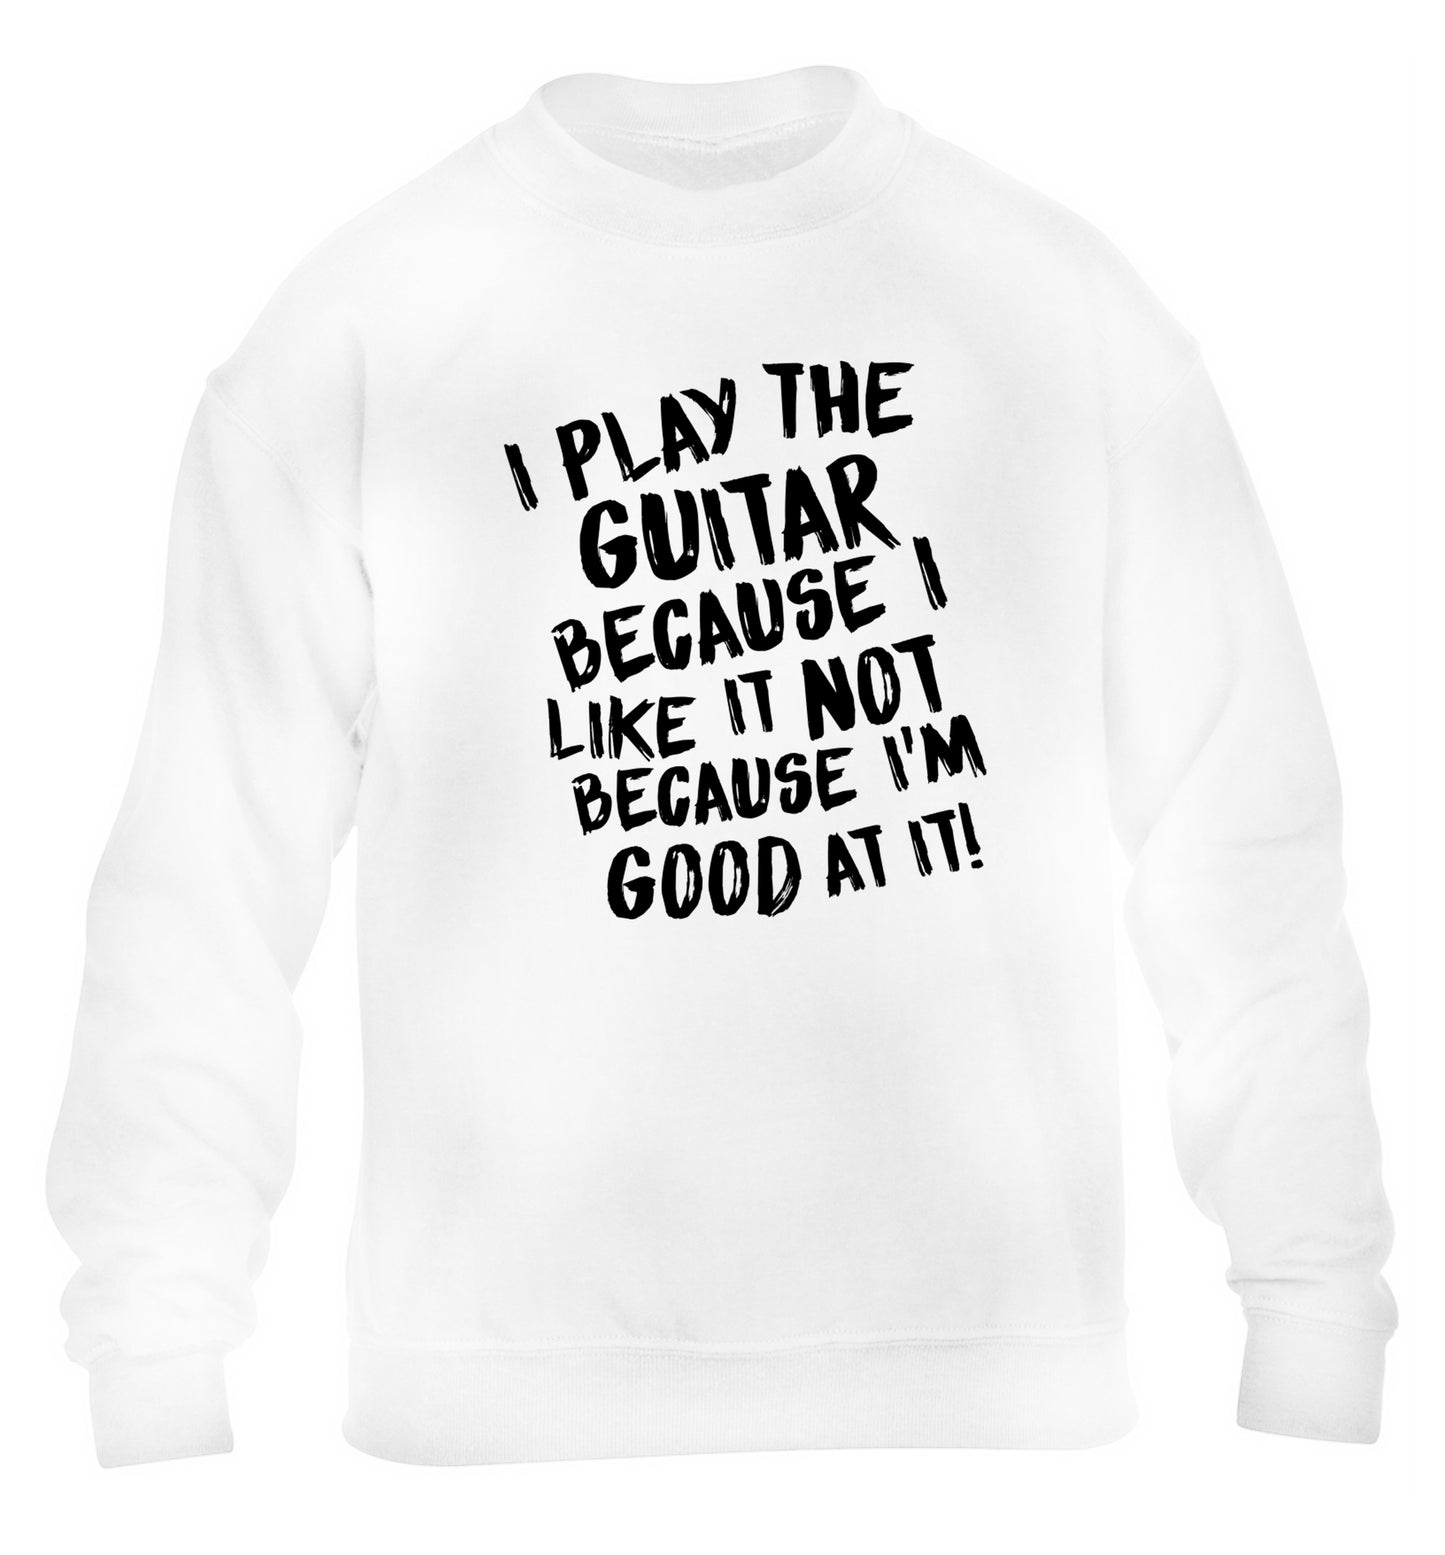 I play the guitar because I like it not because I'm good at it children's white sweater 12-14 Years